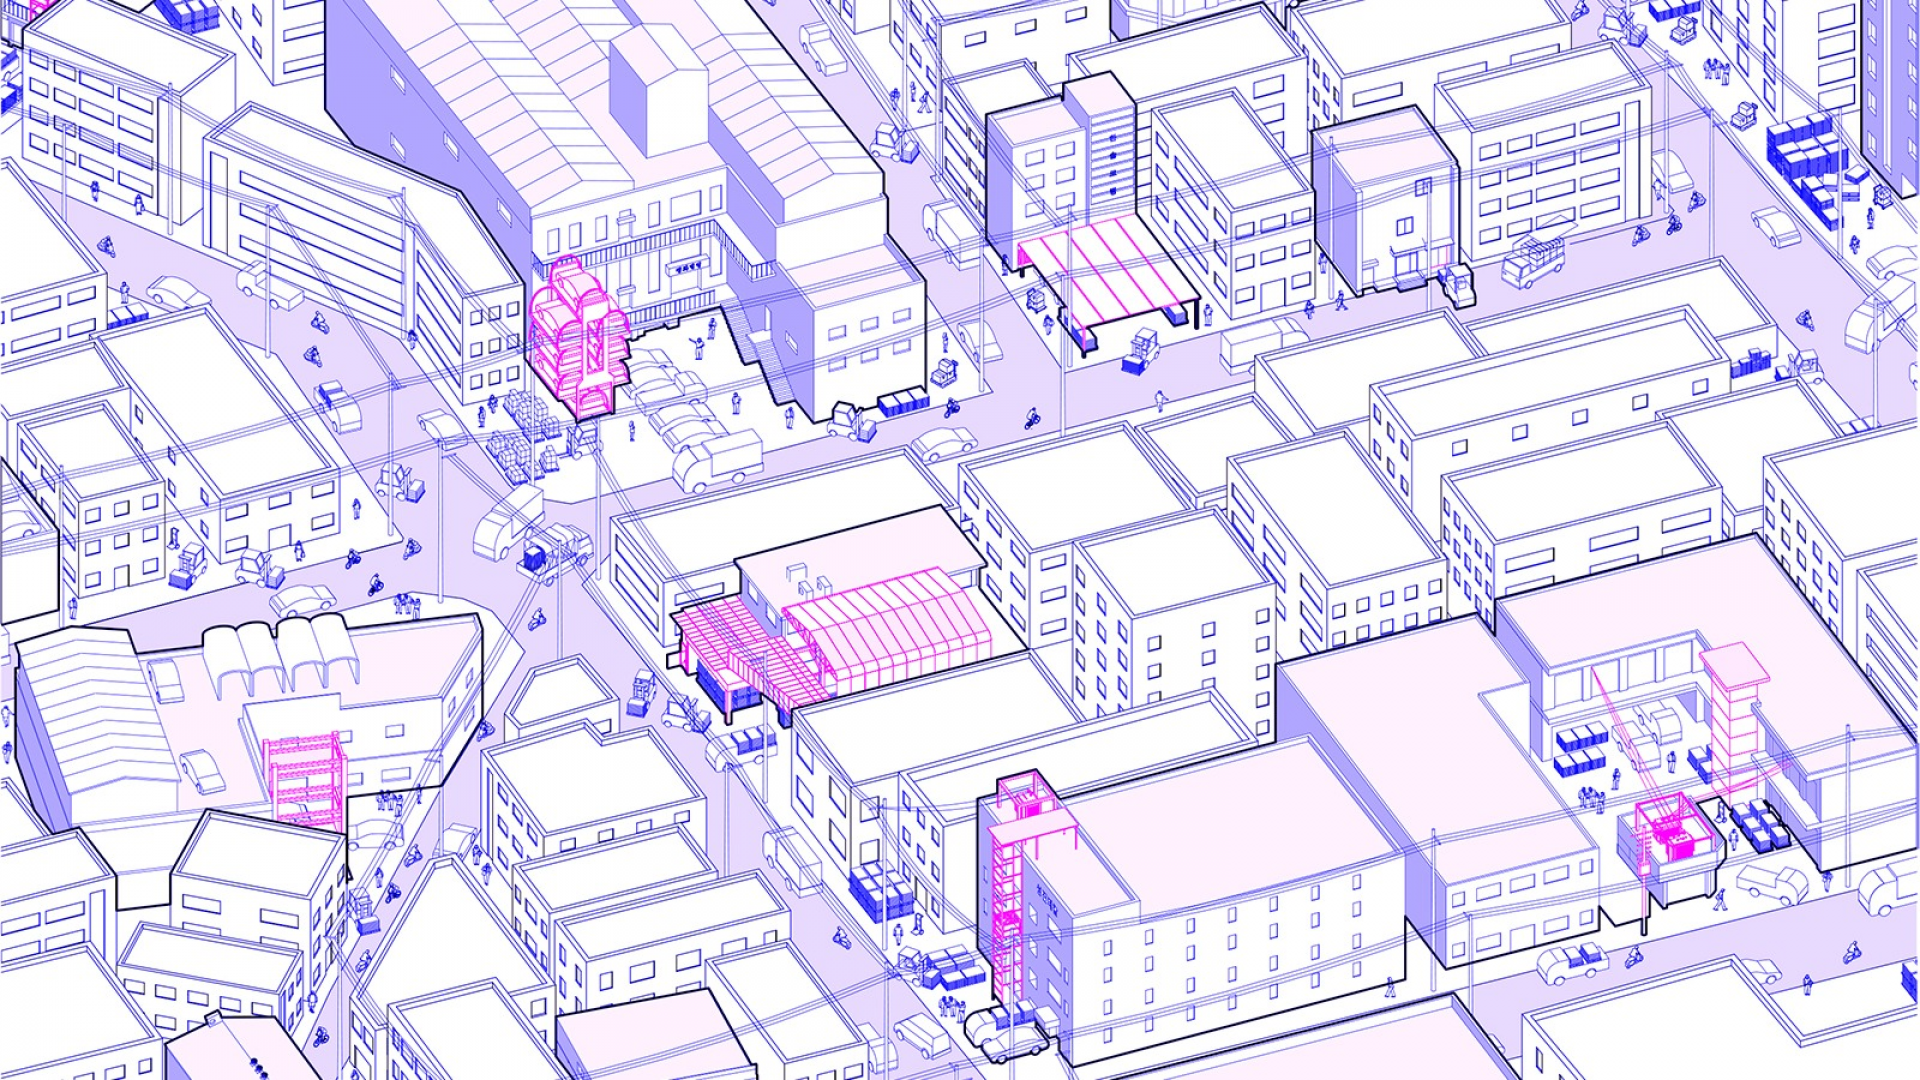 Drawing of adaptions to the urban environment of Seoul to retrofit it for production